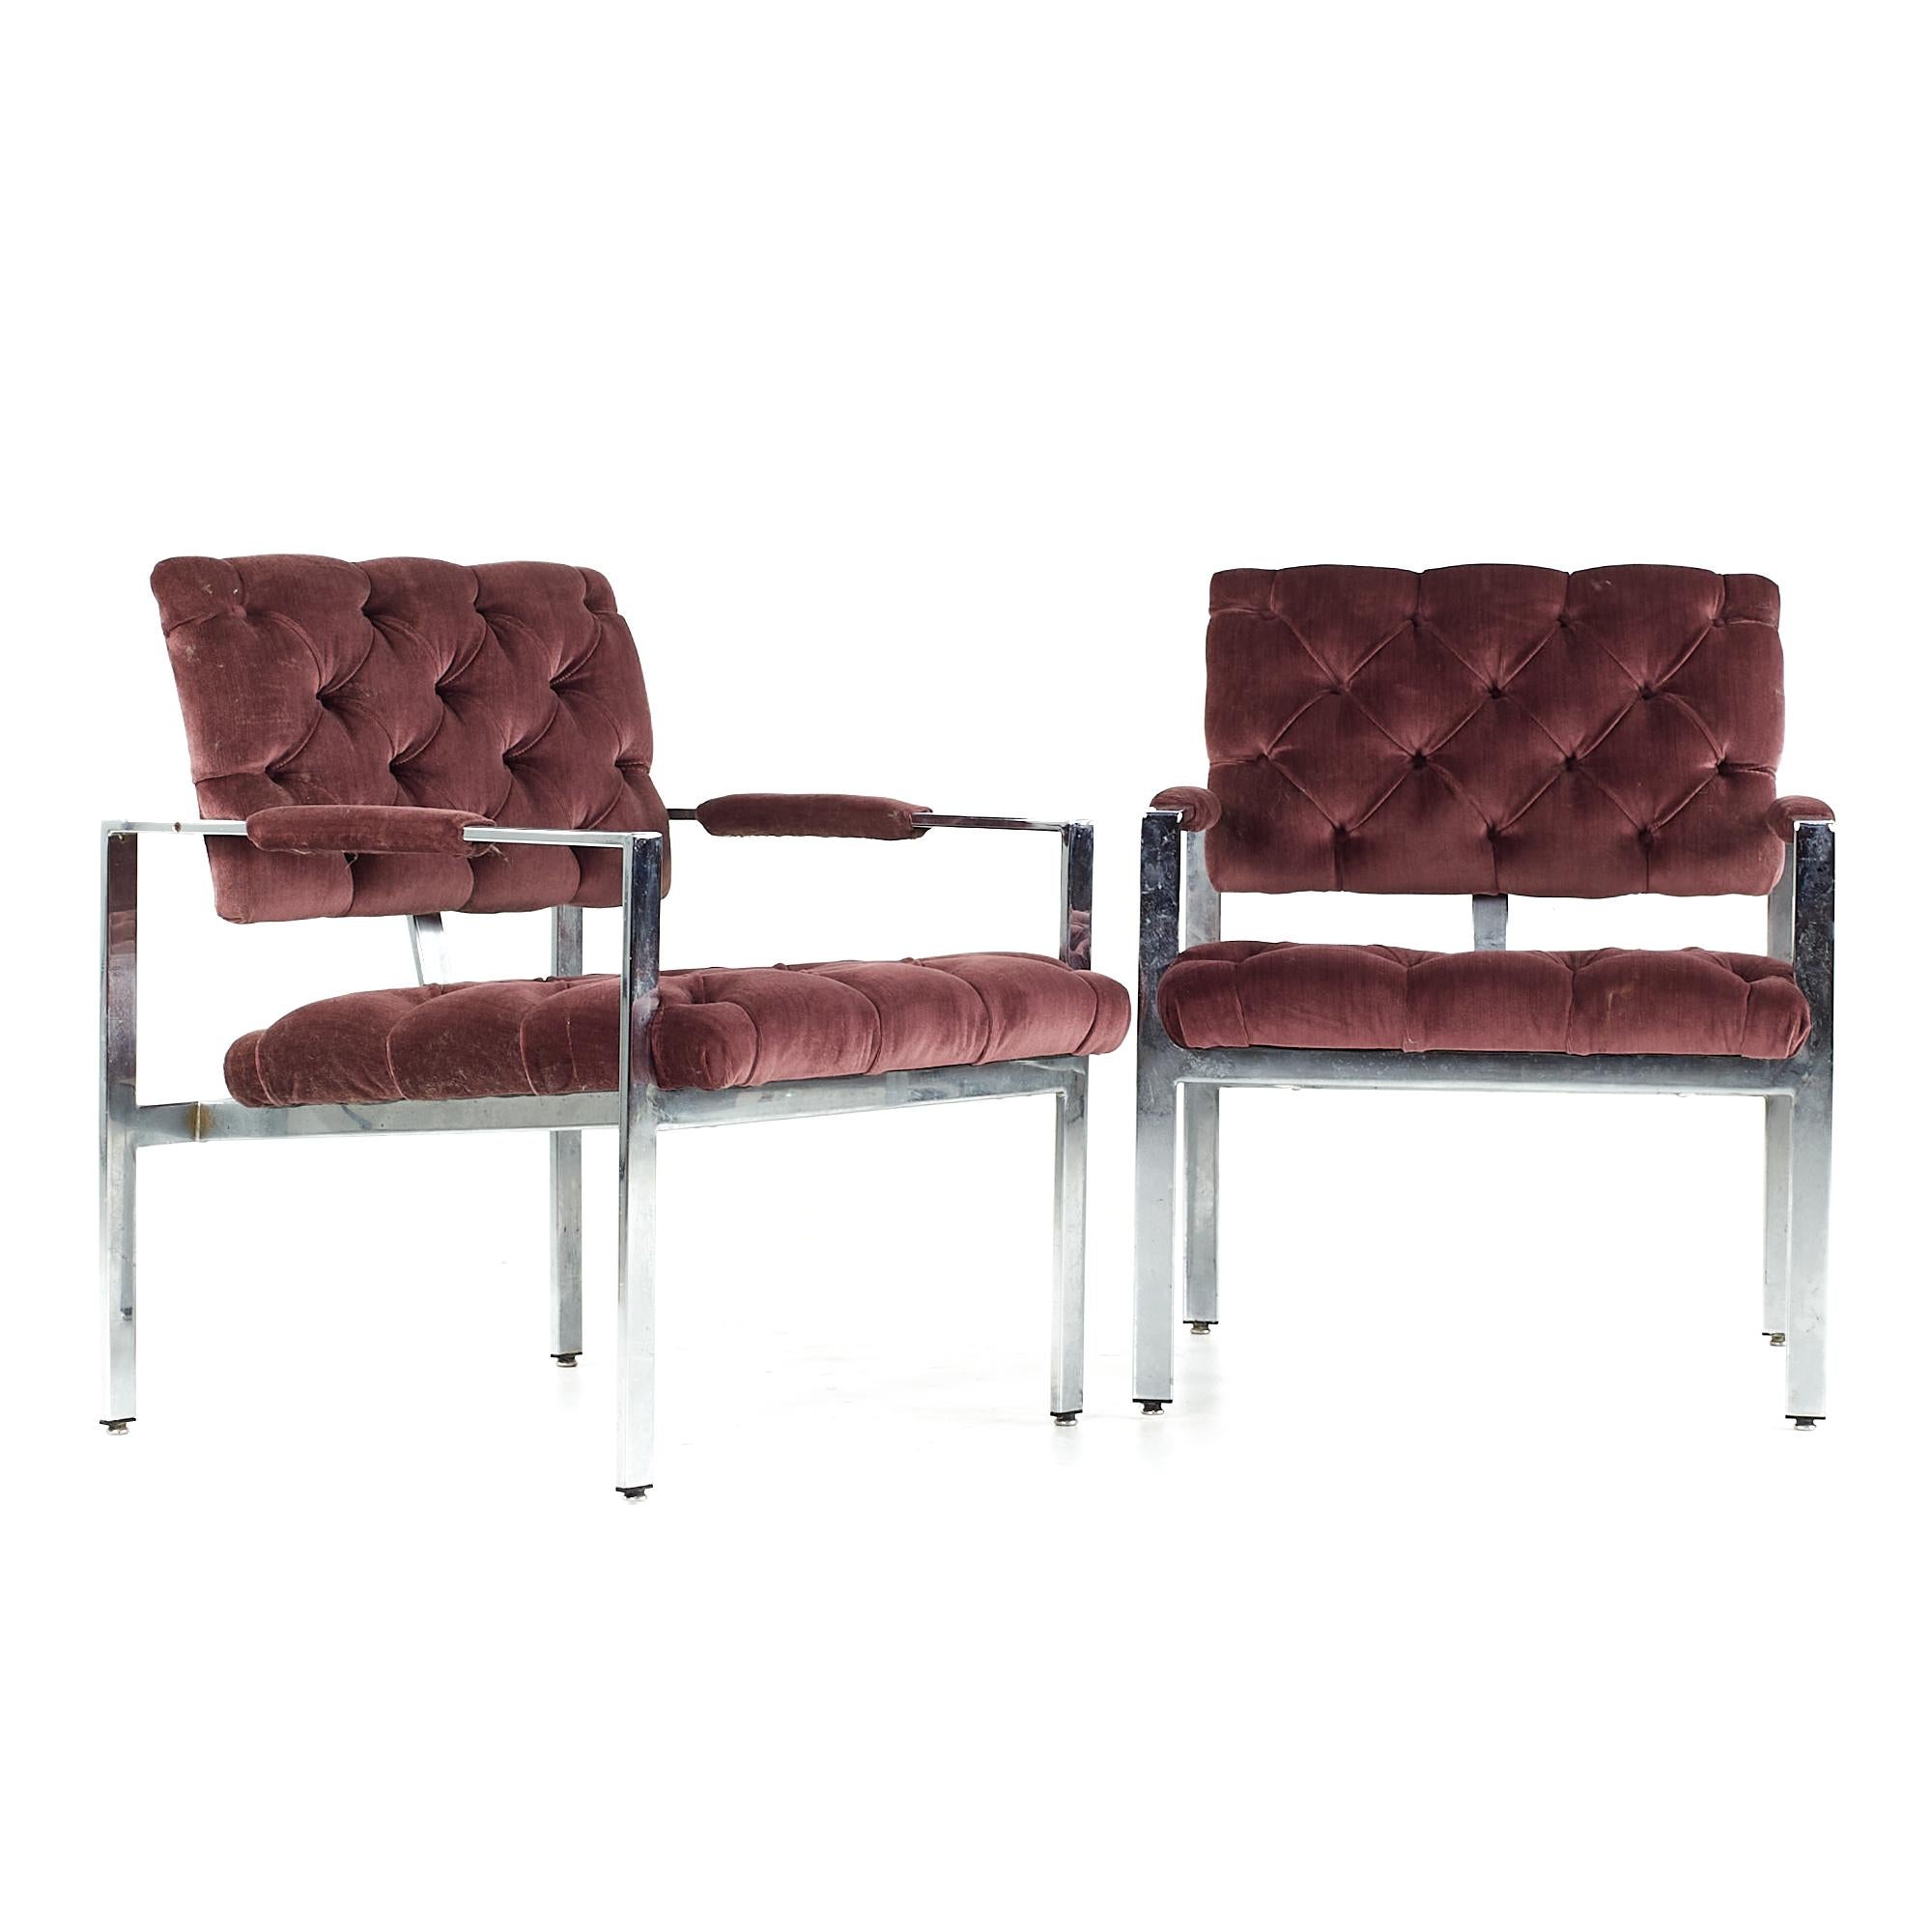 Milo Baughman for Thayer Coggin midcentury Chrome Tufted Arm Chairs – Pair

Each chair measures: 25.75 wide x 28.5 deep x 31.5 inches high, with a seat height of 17 and arm height/chair clearance of 22.5 inches

All pieces of furniture can be